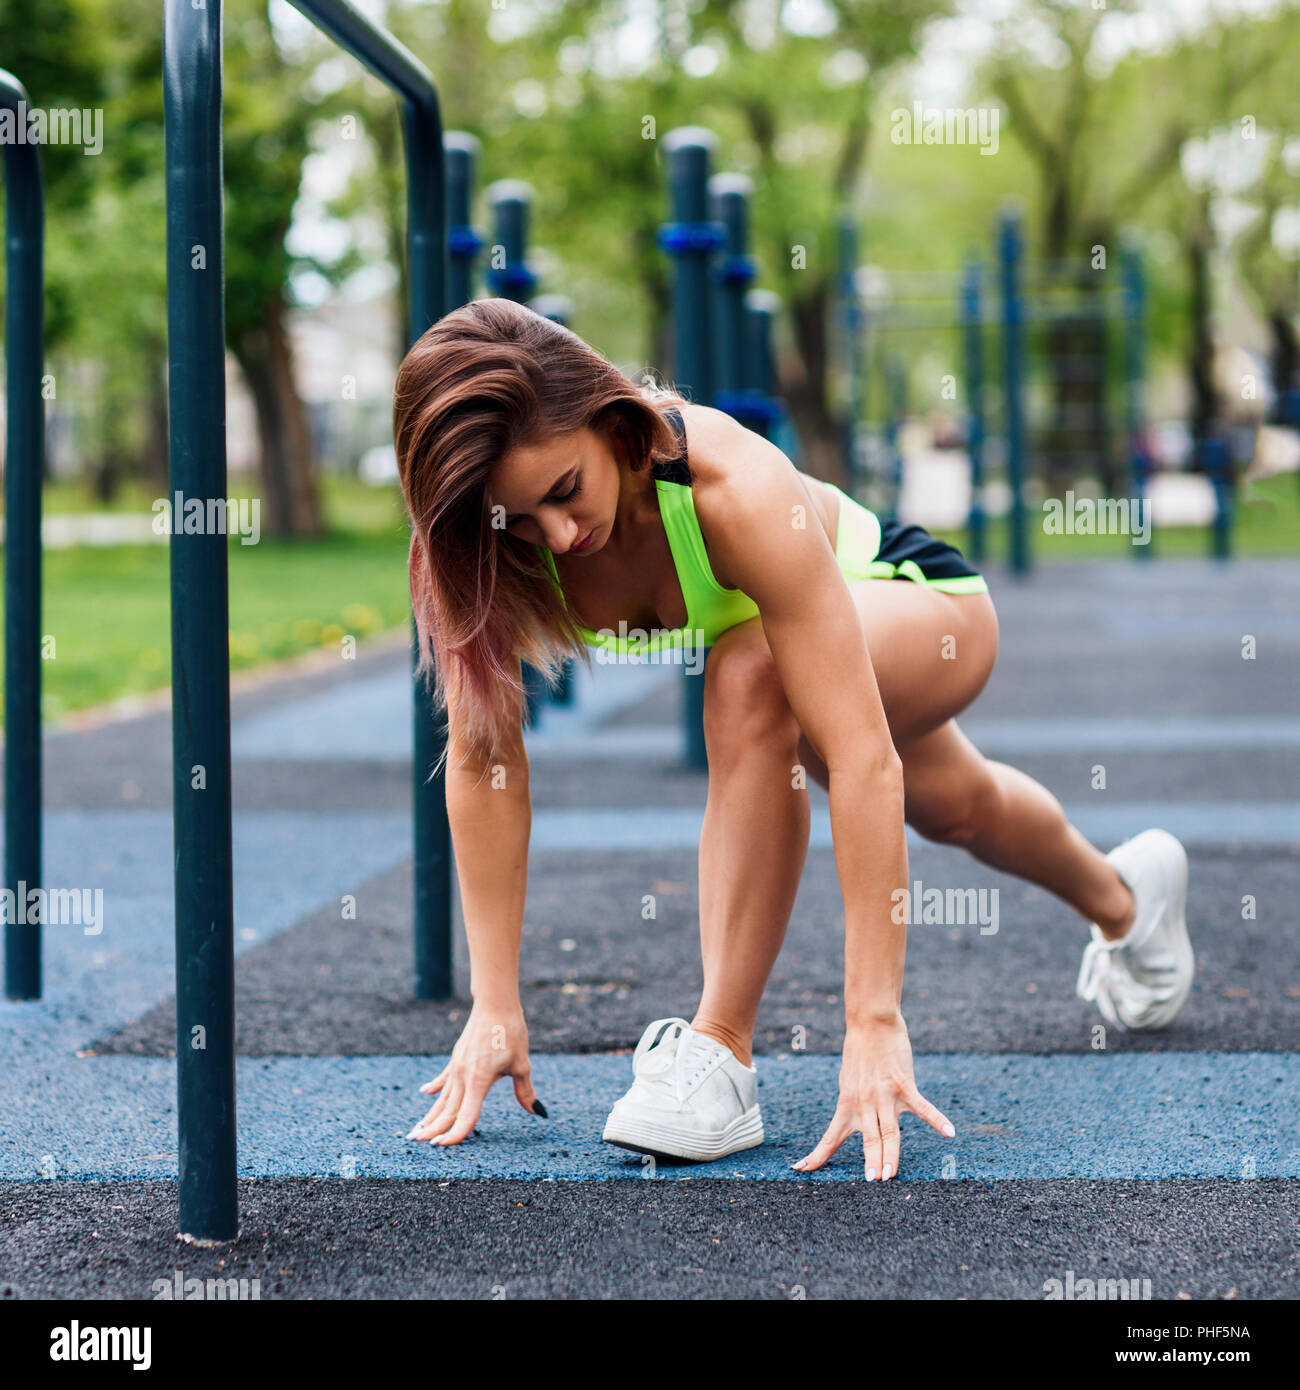 Sporty woman with perfect athletic body stretching in the park